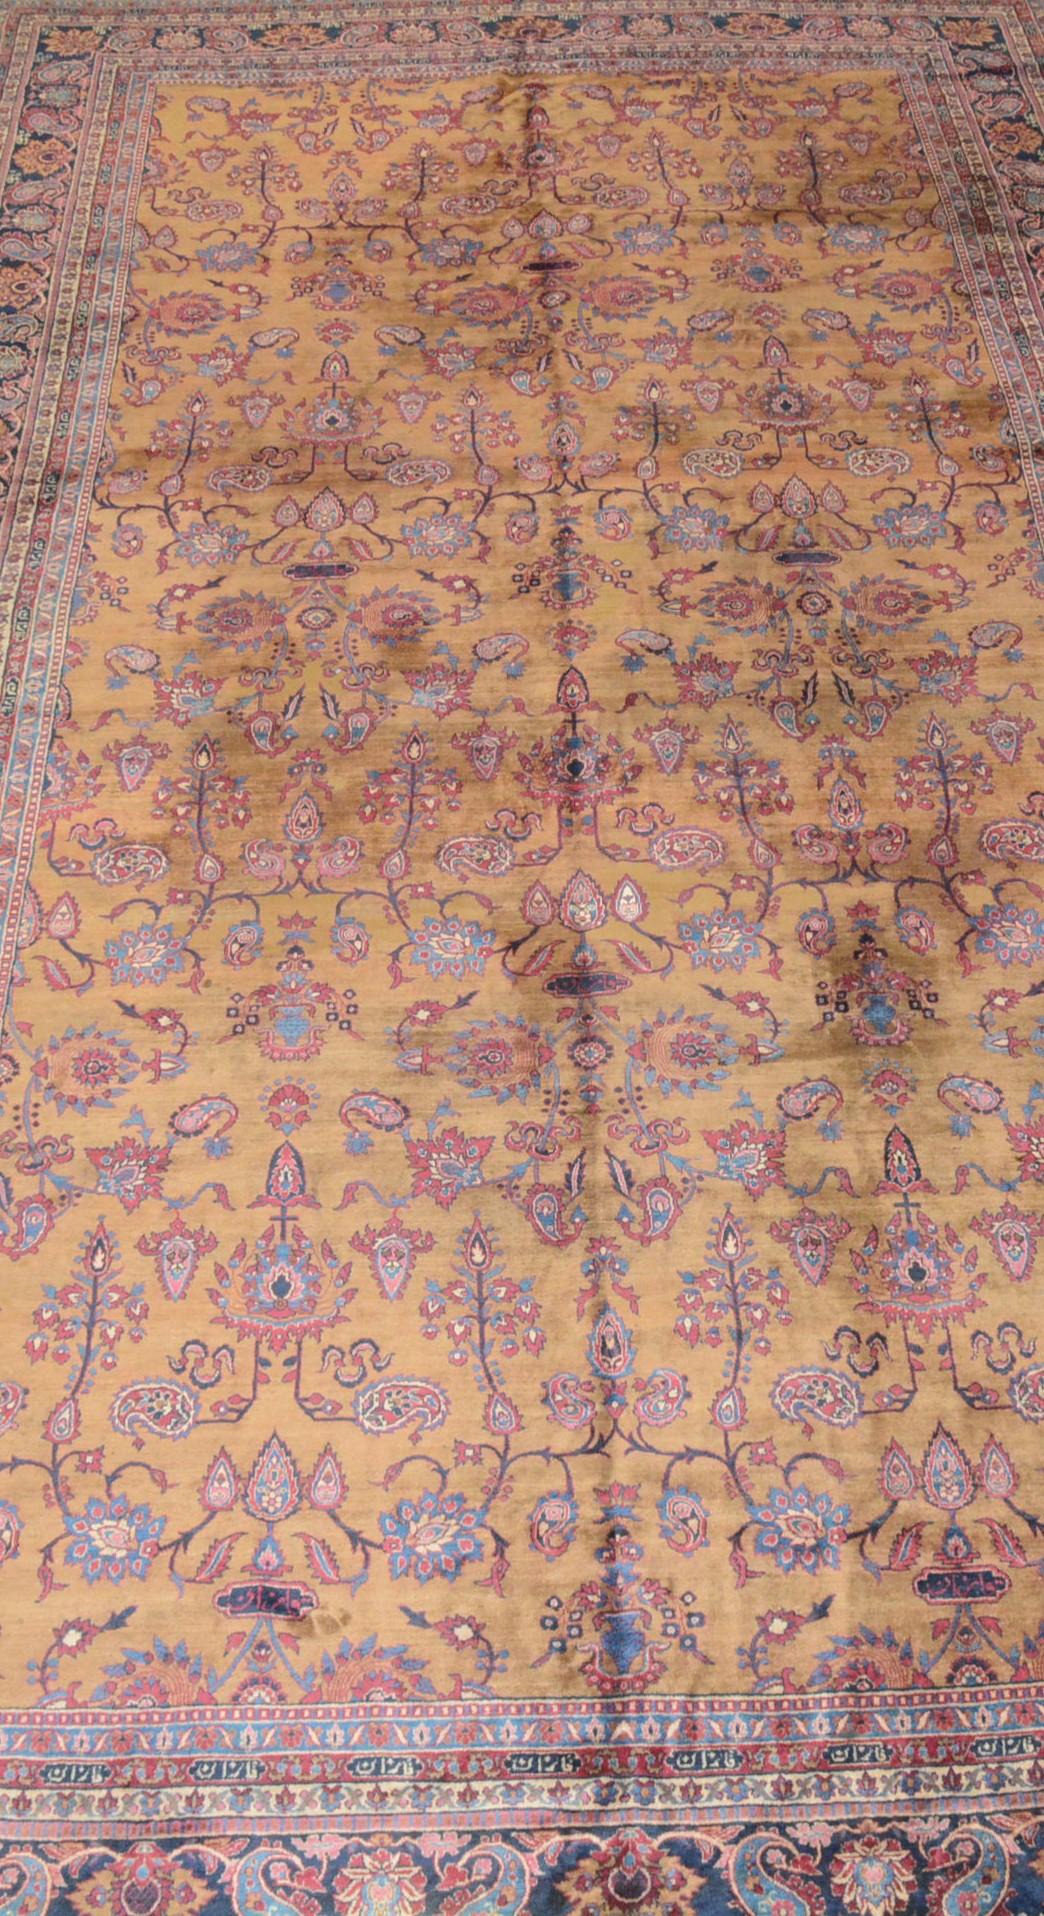 The city of Amritsar, in the Punjab region in northwest India, began producing carpets in the 19th Century when Kashmir was annexed by Maharaja Ranjit Singh. Kashmir was a major weaving center of shawls at the time. The looms established here by